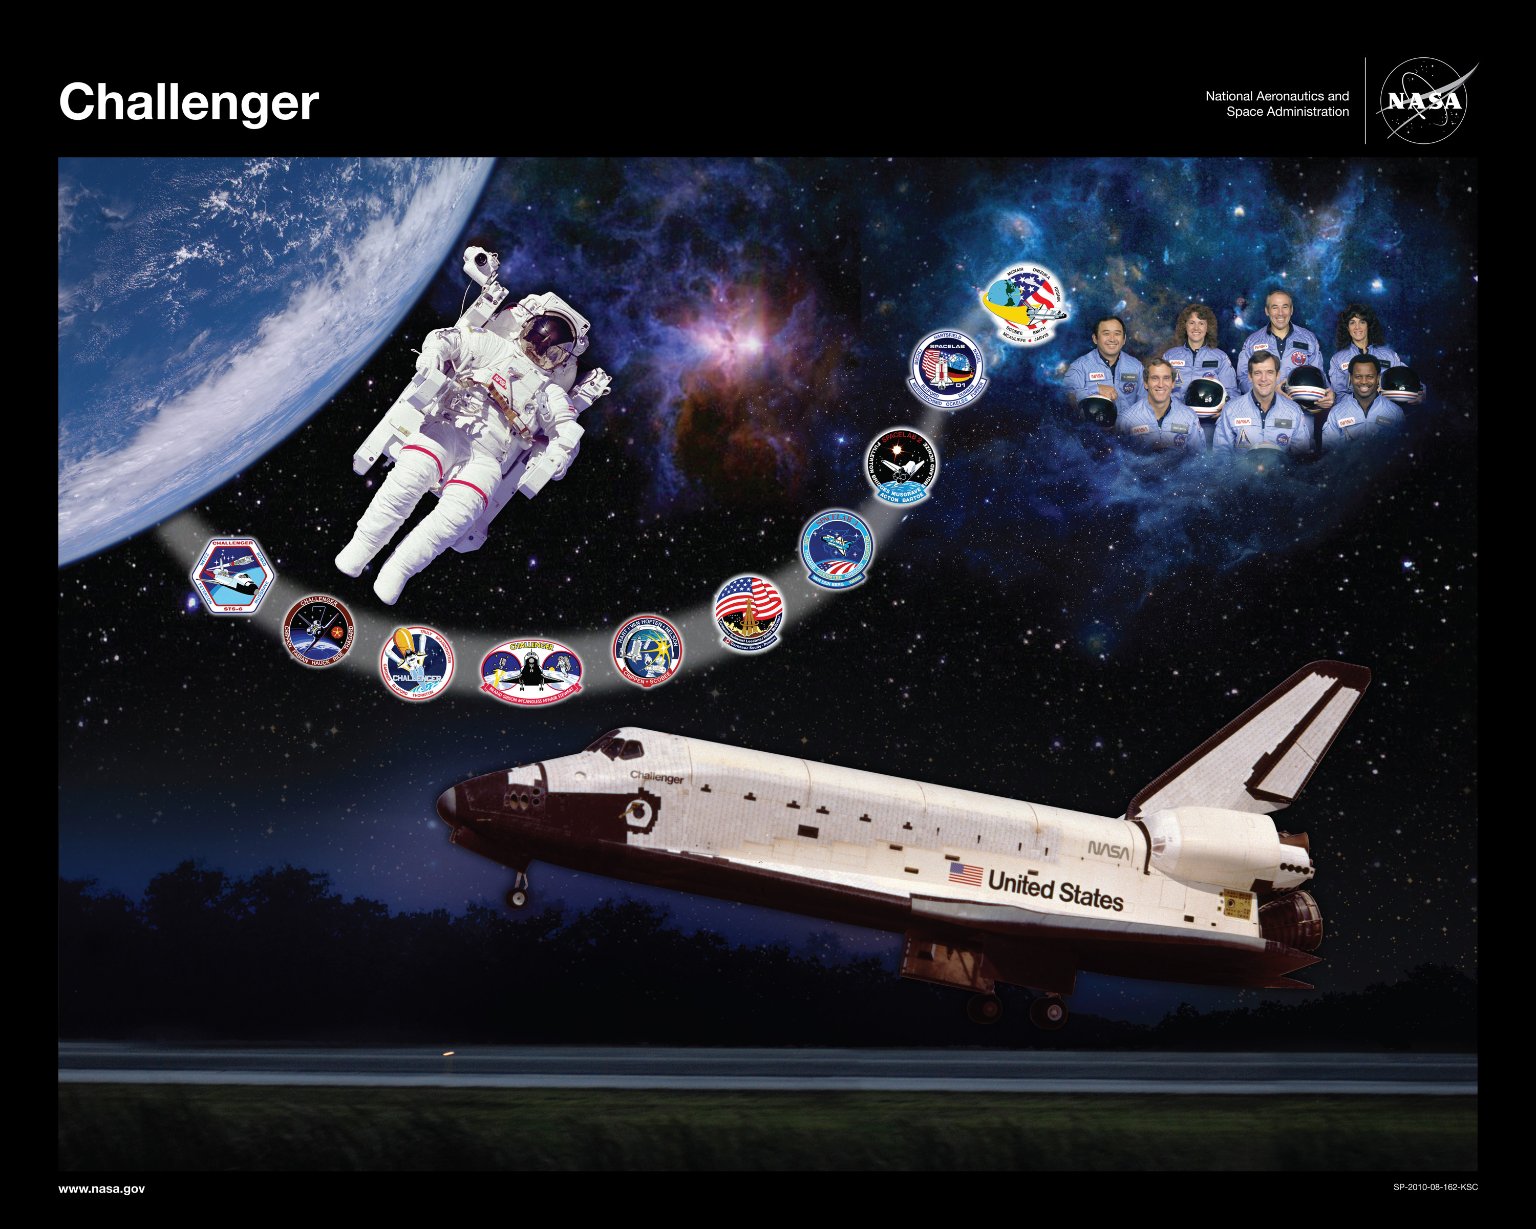 Challenger Disaster - THE TRANSCRIPTS1536 x 1229